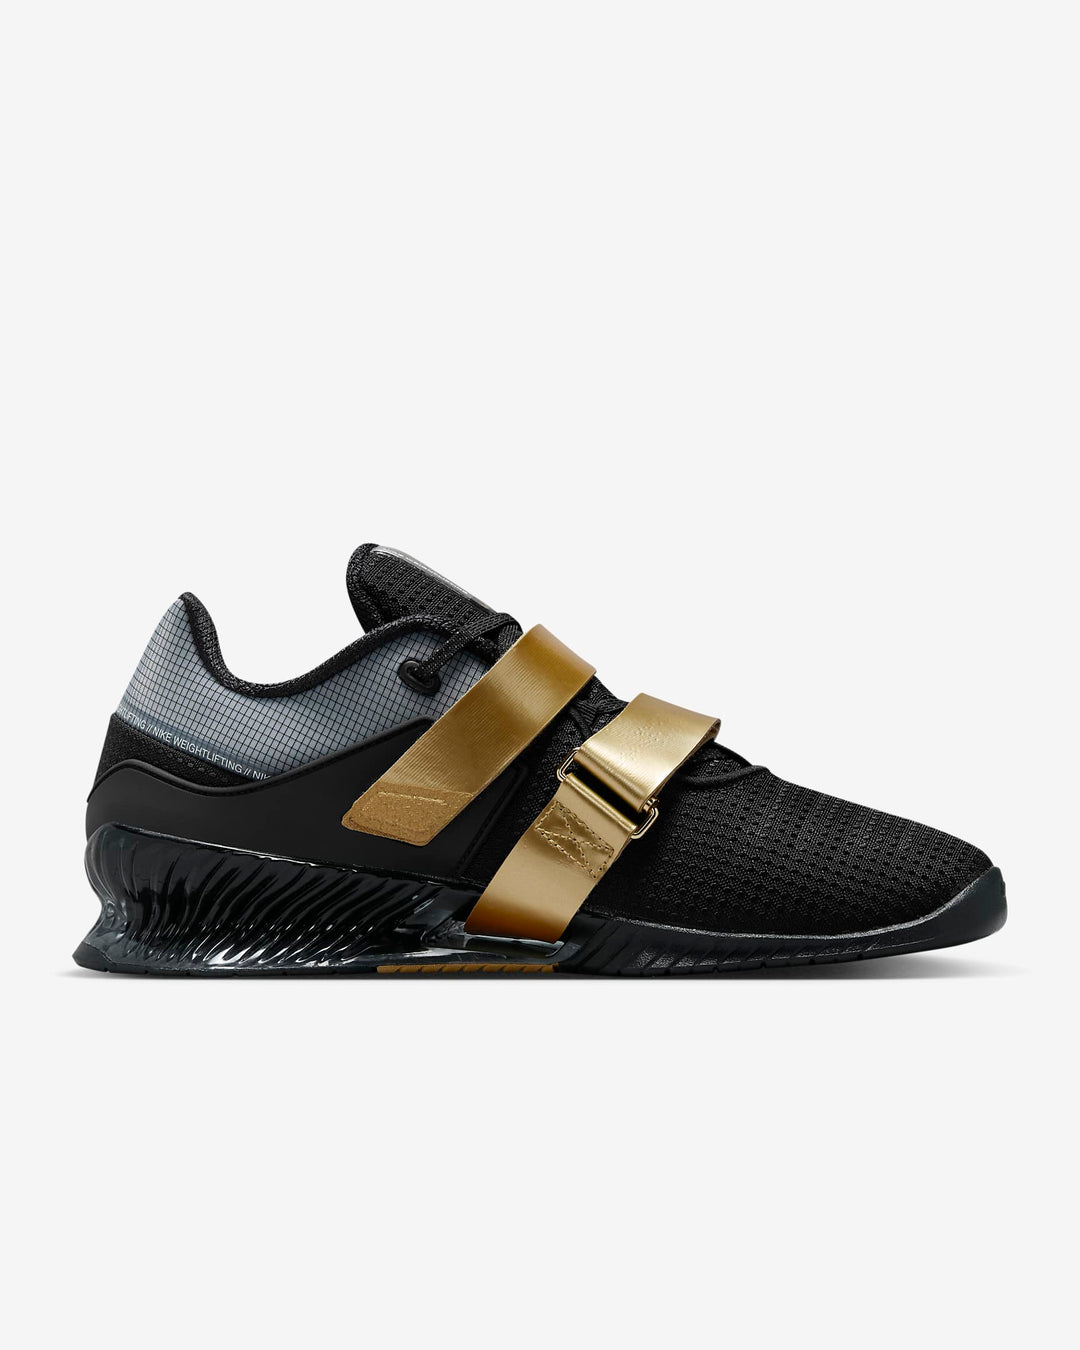 Giày Nike Romaleos 4 Weightlifting Shoes #Metallic Gold